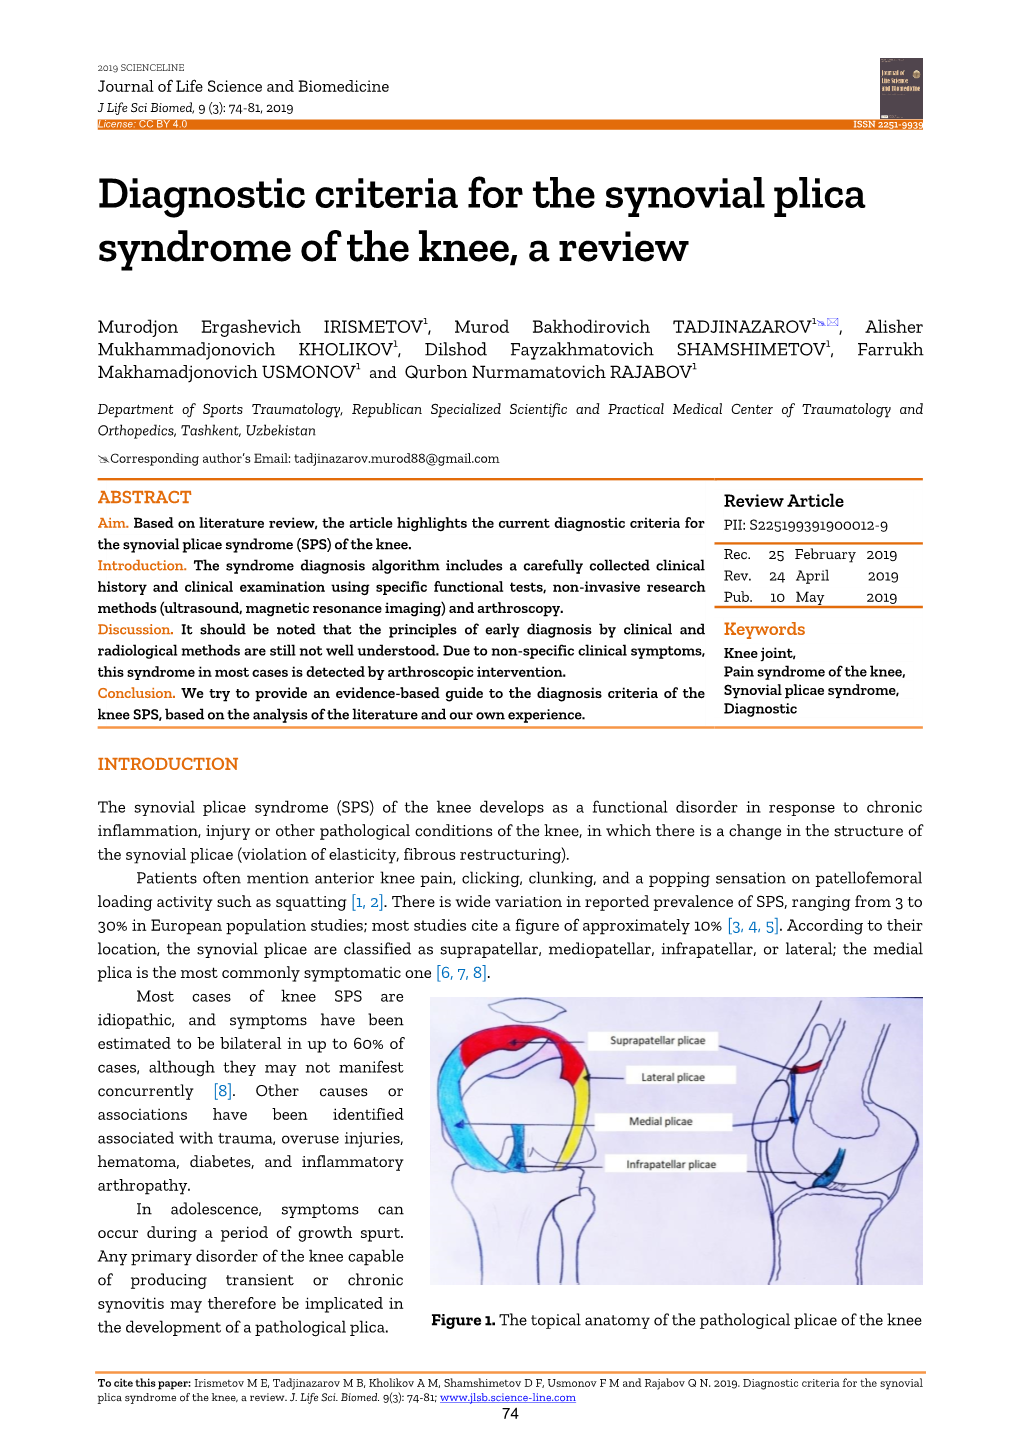 Diagnostic Criteria for the Synovial Plica Syndrome of the Knee, a Review